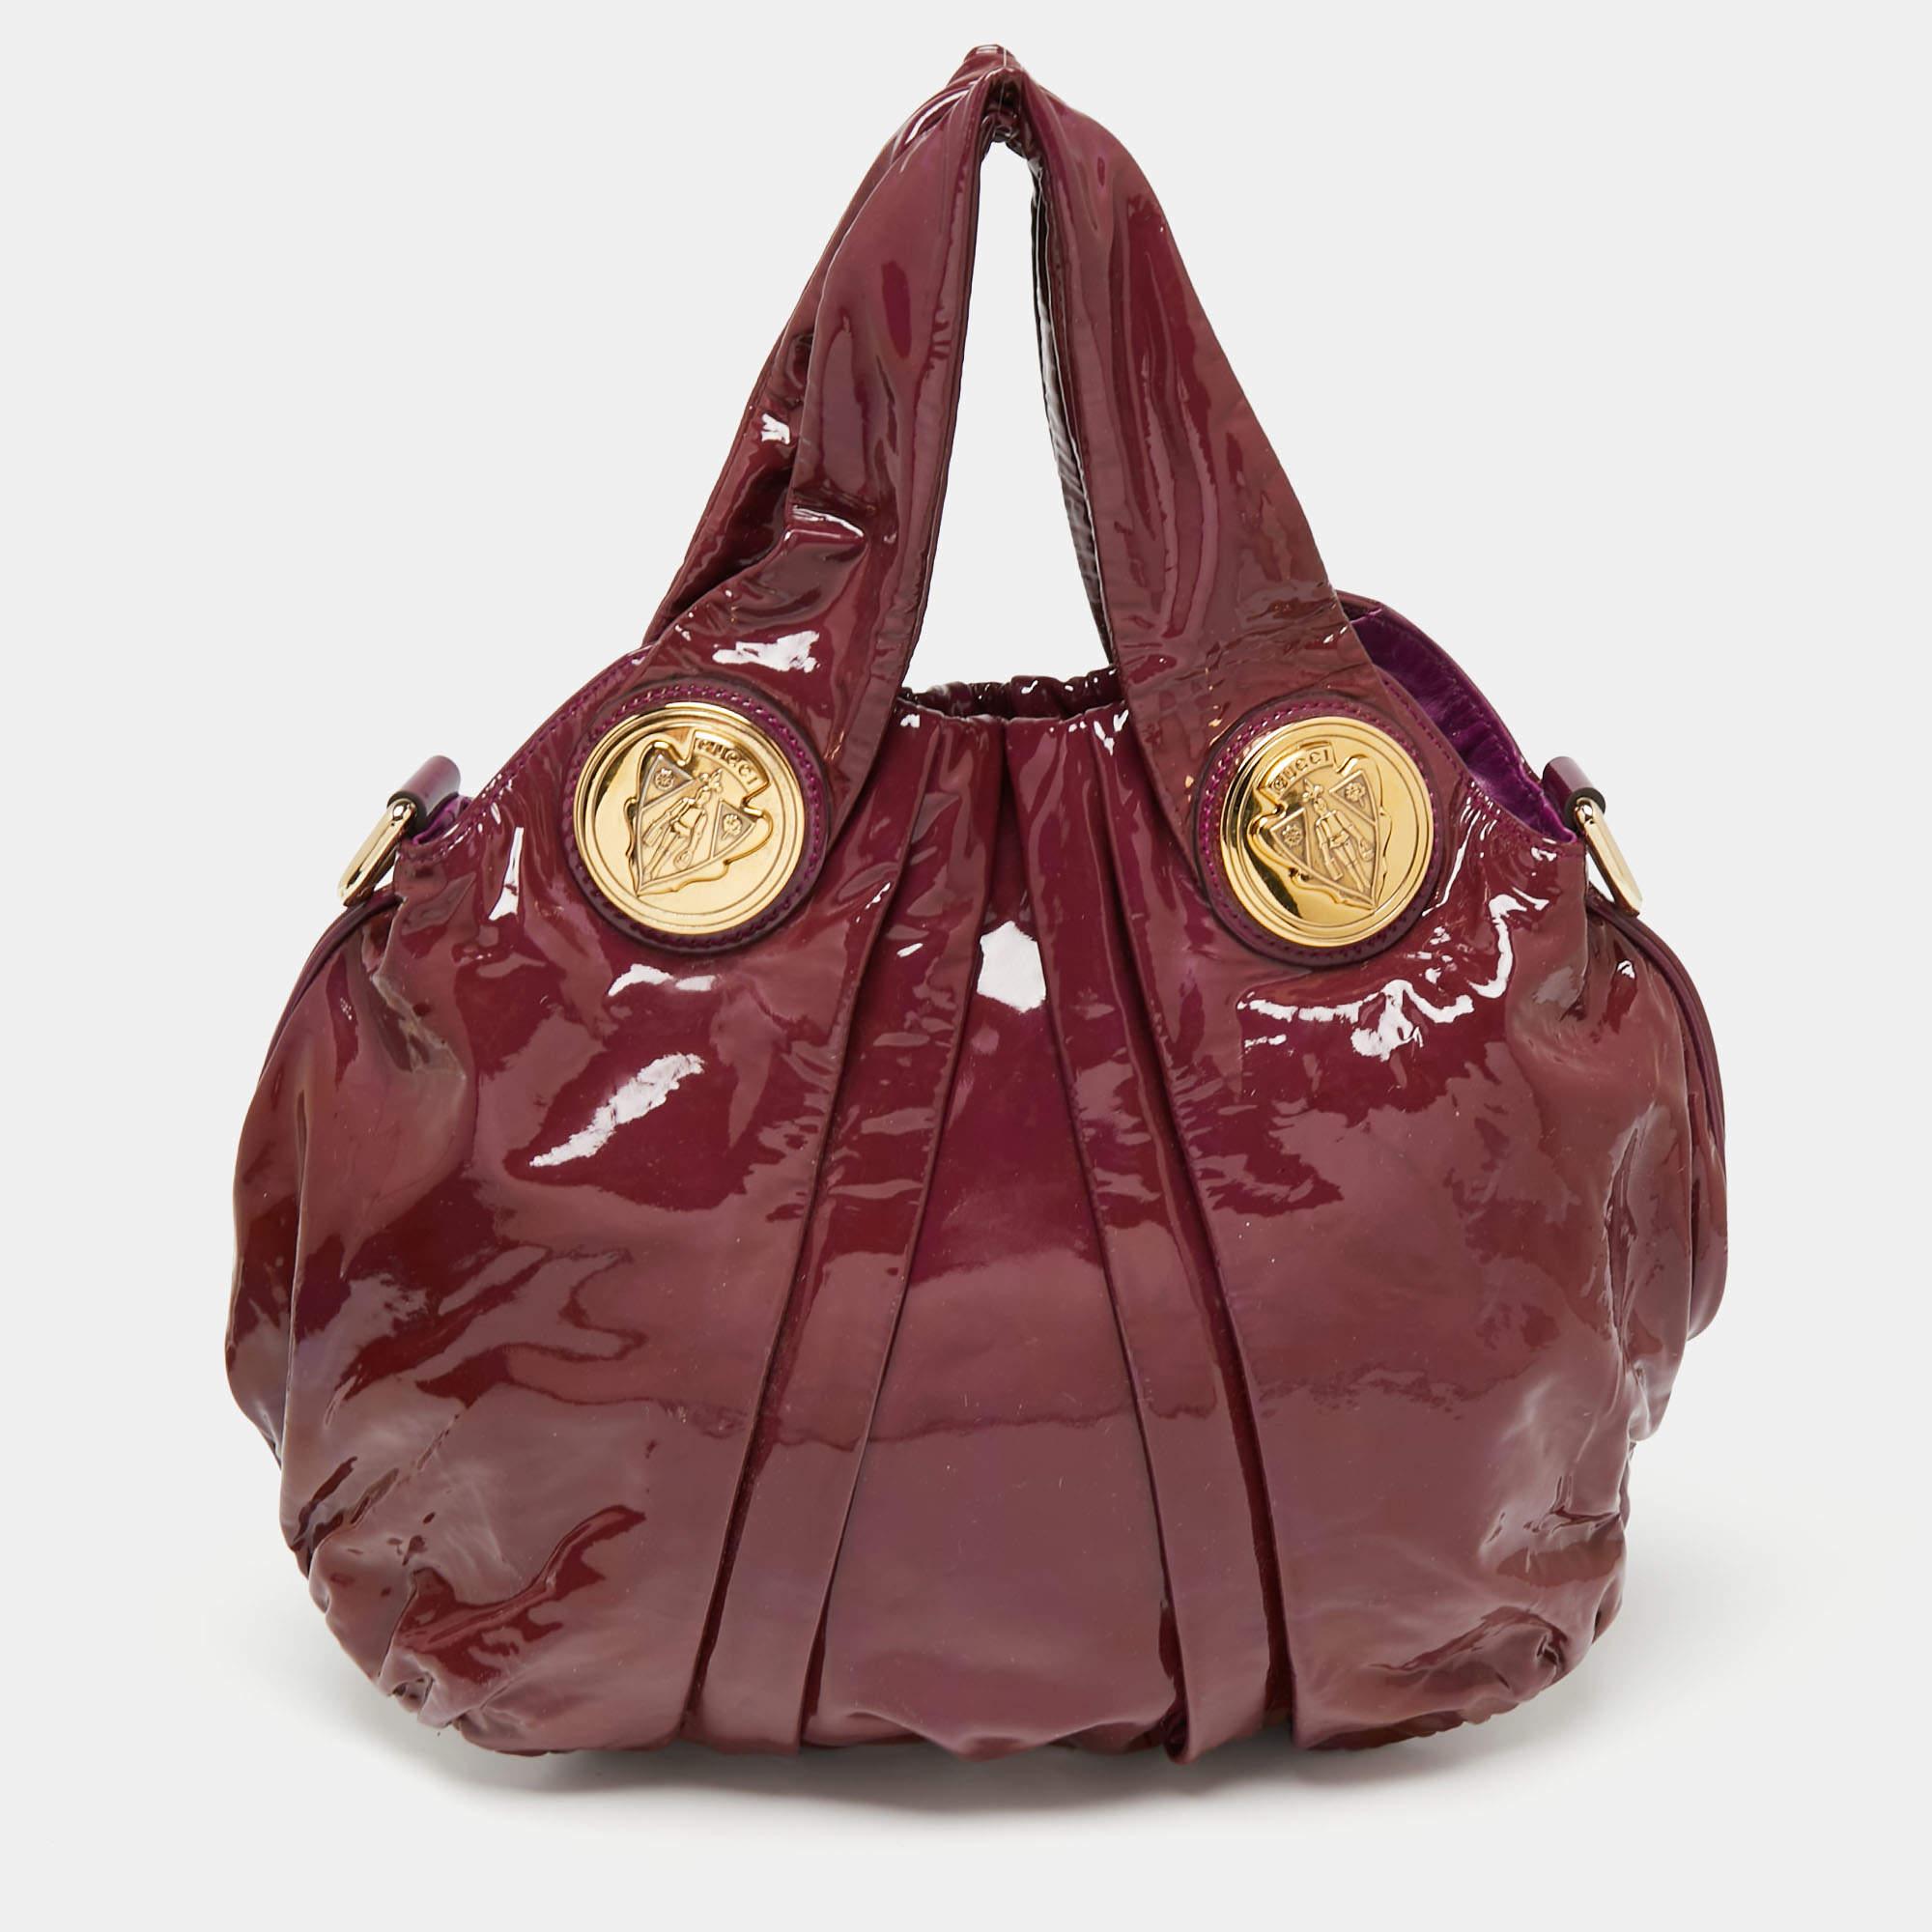 This Gucci hobo is built for everyday use. Crafted from patent leather, it has a classic-look exterior and is fitted with two top handles and a shoulder strap. The interior is sized spaciously and the hobo is complete with the signature emblems.

